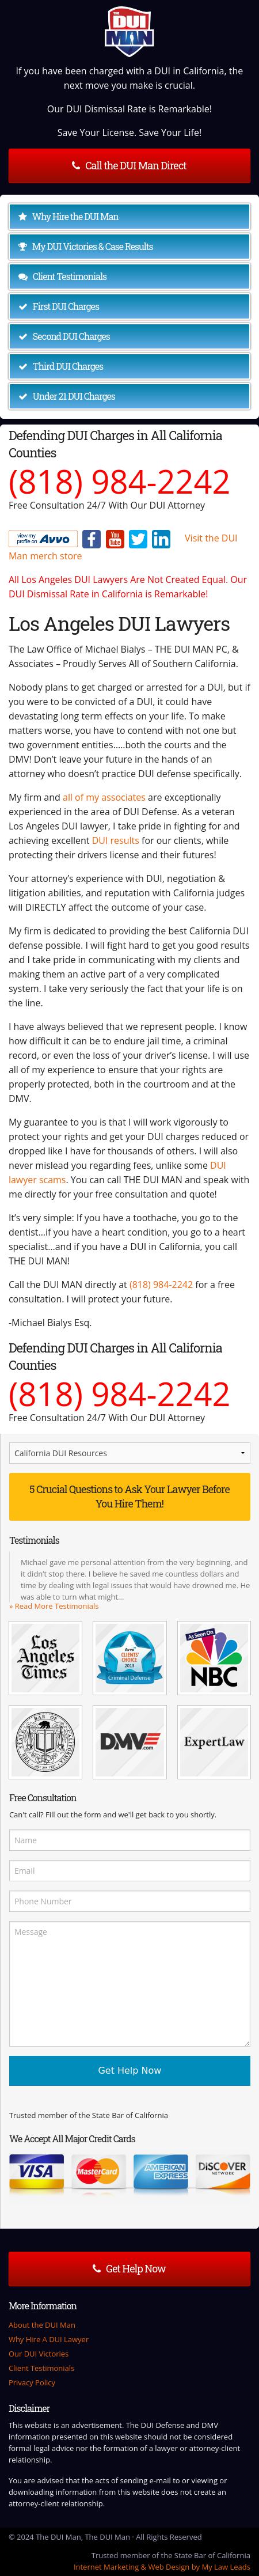 The DUI Man - Canyon Country Law Offices of Michael Bialys - Canyon Country CA Lawyers